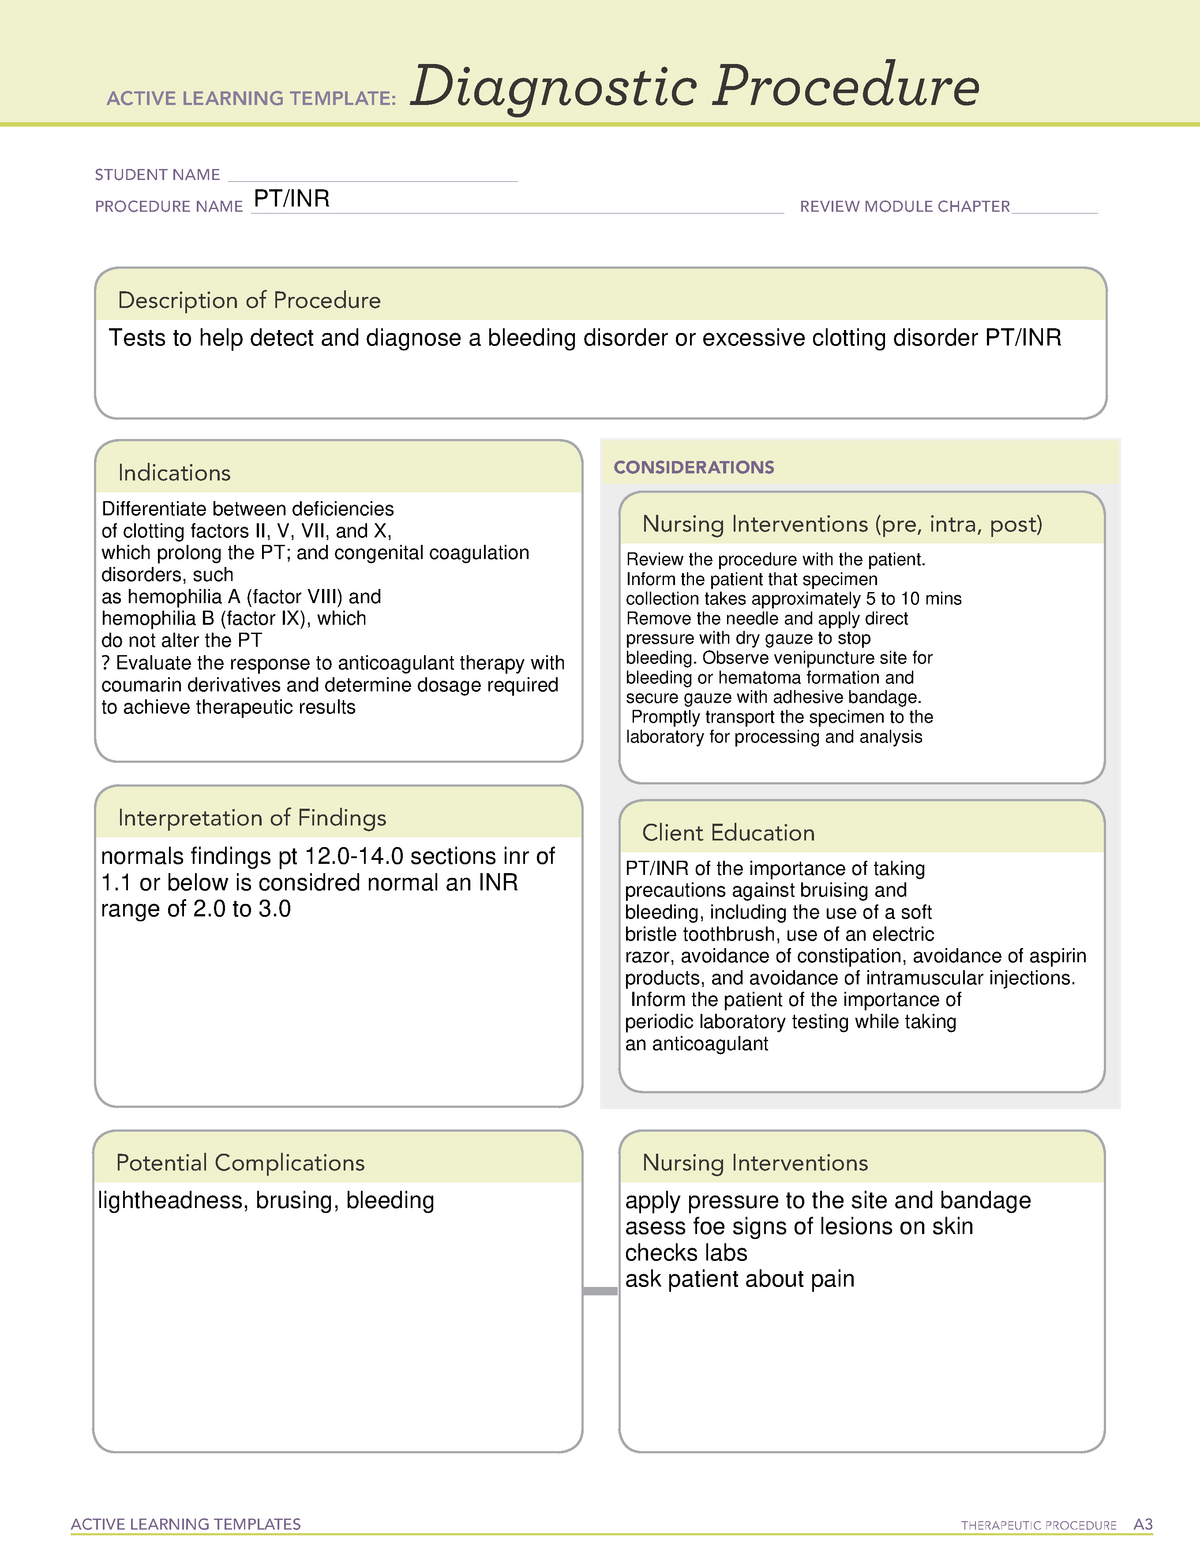 Active Learning Template Diagnostic Procedure form ACTIVE LEARNING